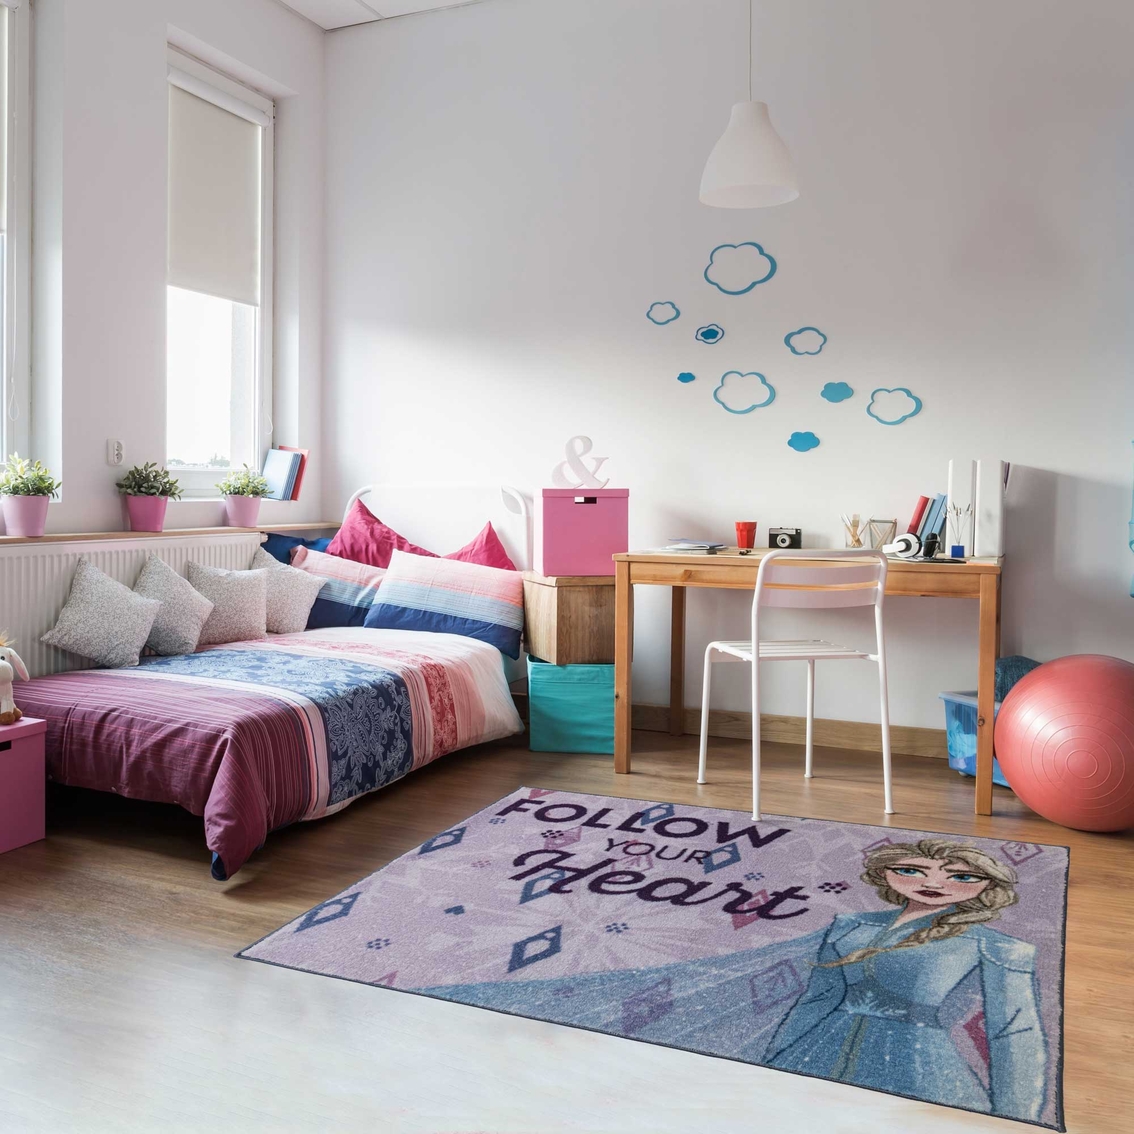 Disney Frozen Follow Your Heart 40 x 54 Accent Rug - Image 2 of 5